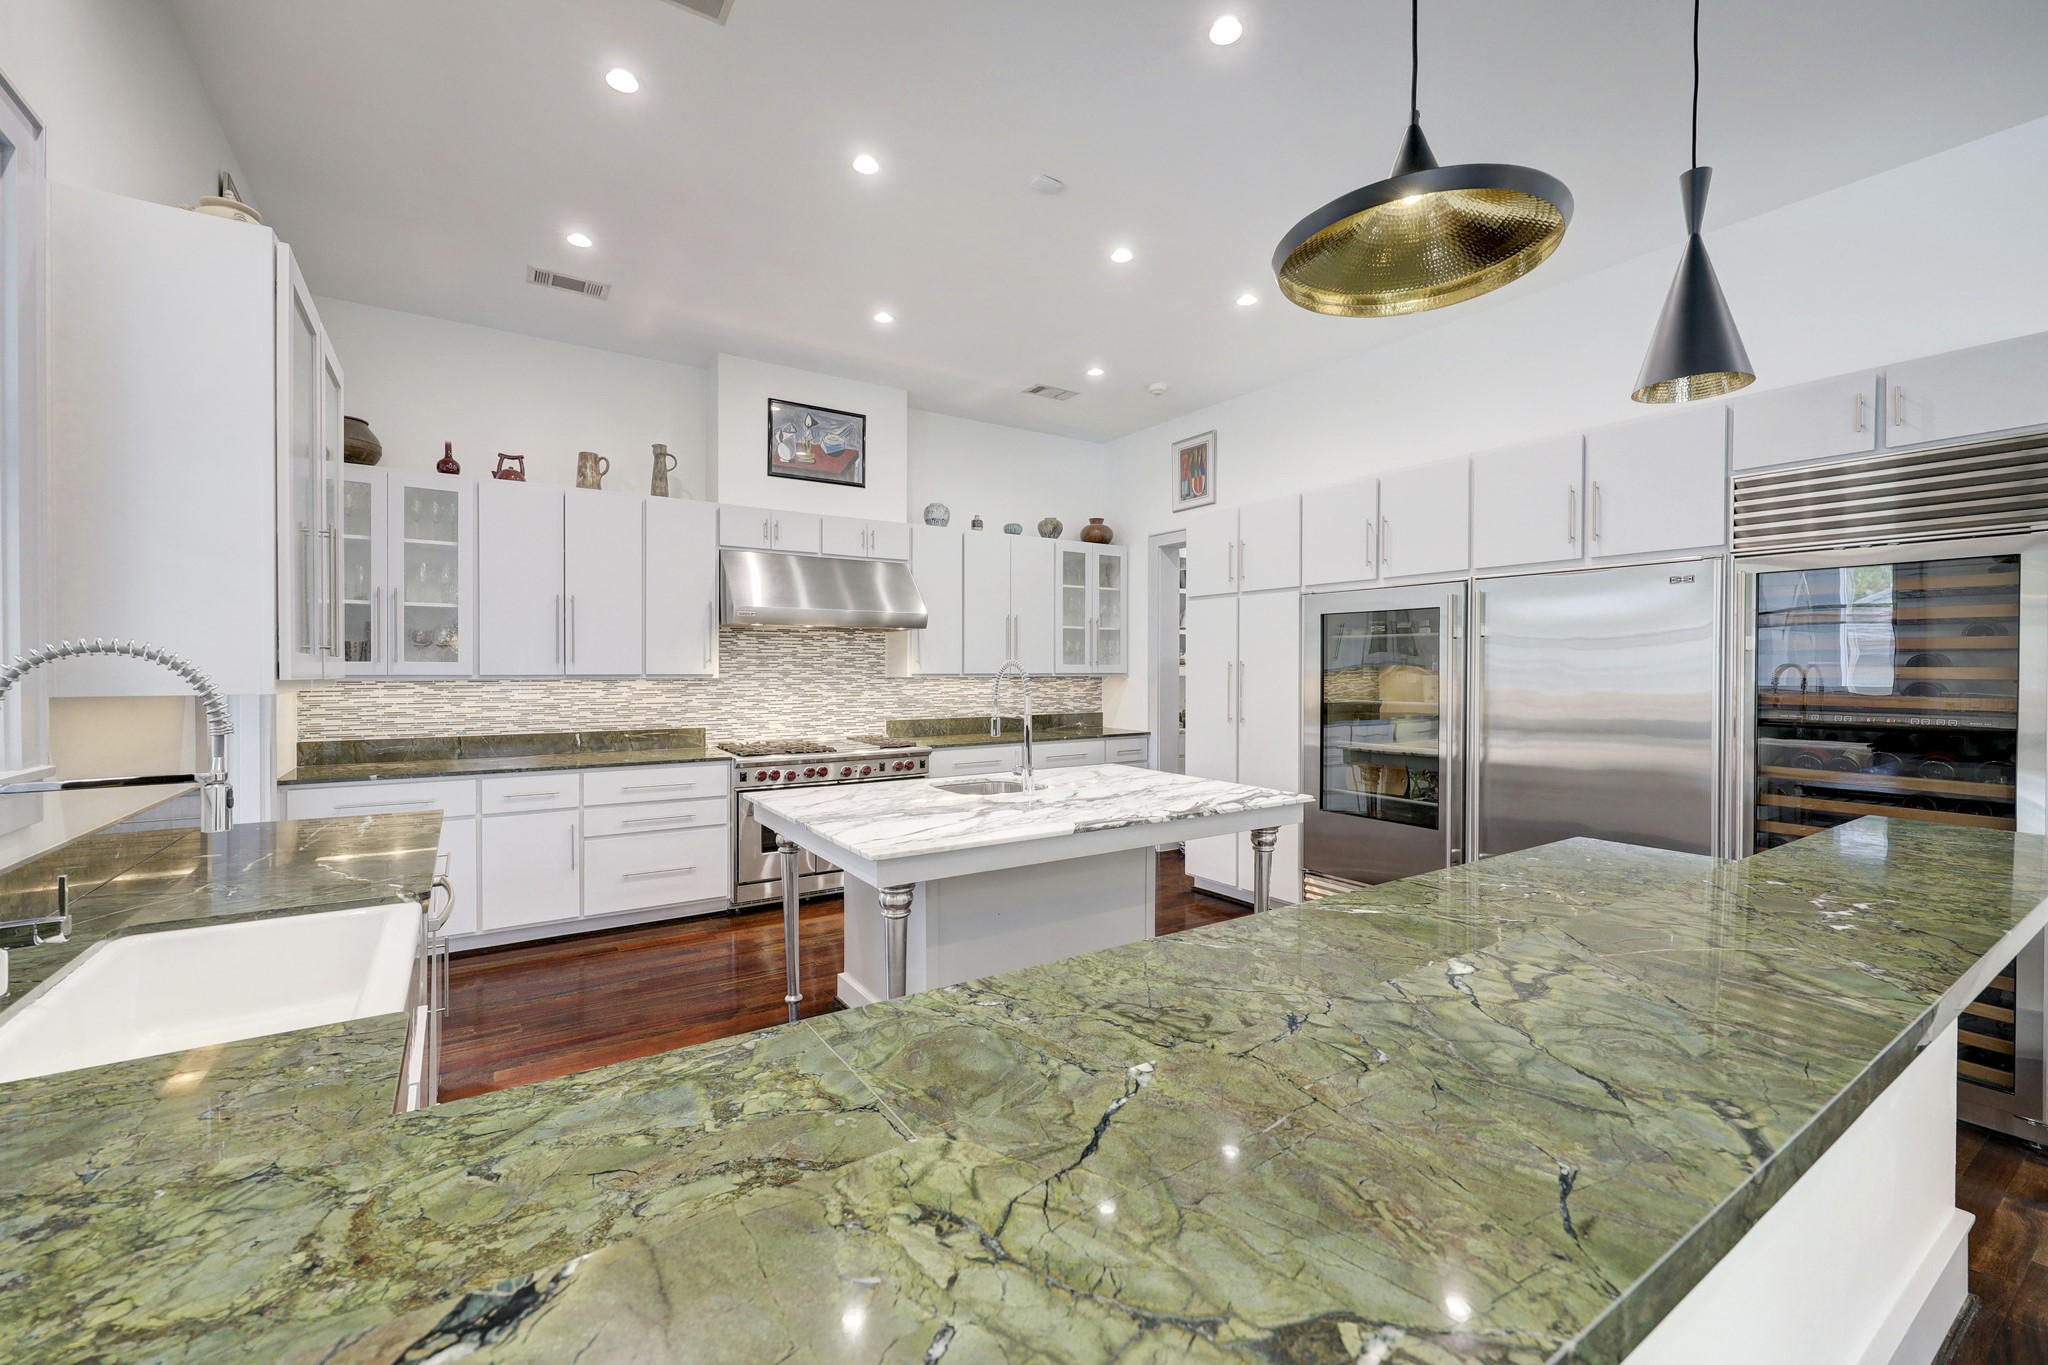 The island kitchen is equipped for entertaining with 48” wolf range with 6 gas burner, griddle and two ovens, 2 sinks, huge glass-front Sub-Zero refrigerator and freezer and a large wine refrigerator! You can seat at least four people at the breakfast bar. Gorgeous marble counters!